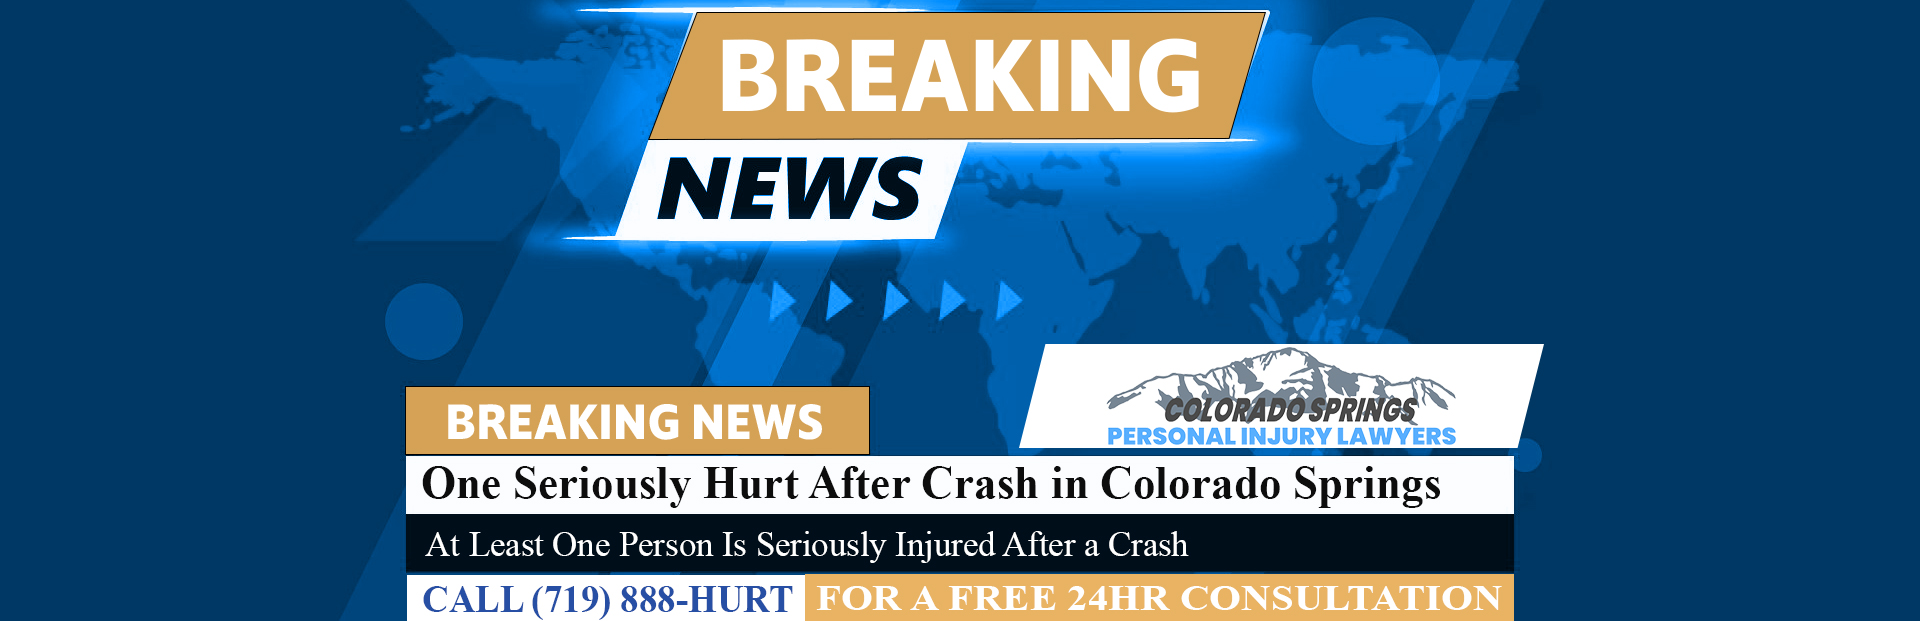 [09-25-23] One Seriously Hurt After Crash in Northeast Colorado Springs